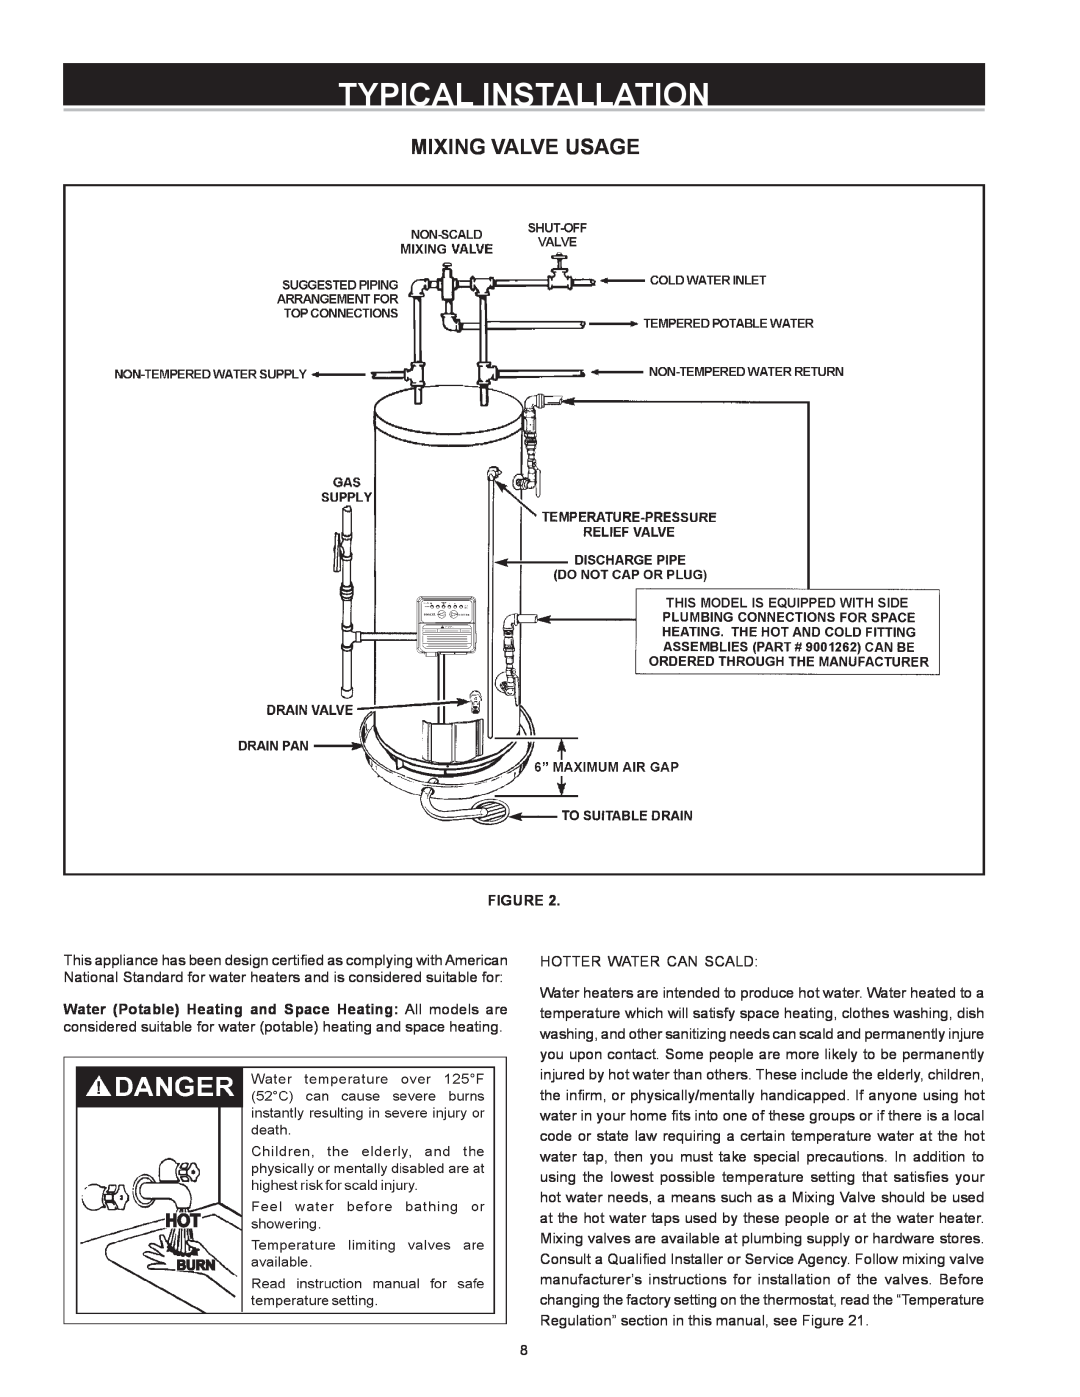 State Industries GS675YRVIT, GS675HRVIT instruction manual Mixing Valve Usage, Typical Installation 